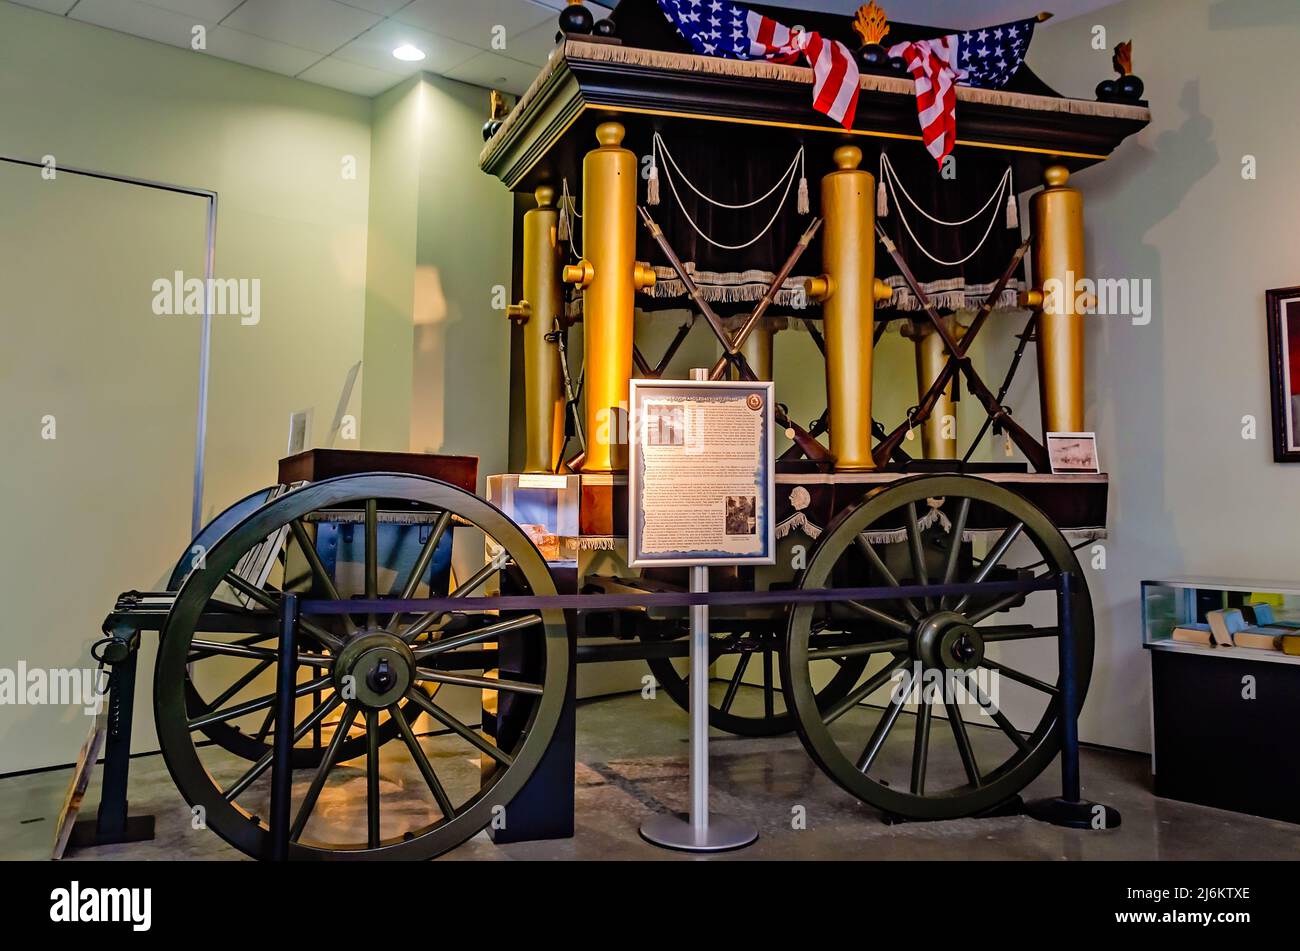 The catafalque, a funeral carriage used for Confederate President Jefferson Davis, is displayed at the Jefferson Davis Presidential Library in Biloxi. Stock Photo